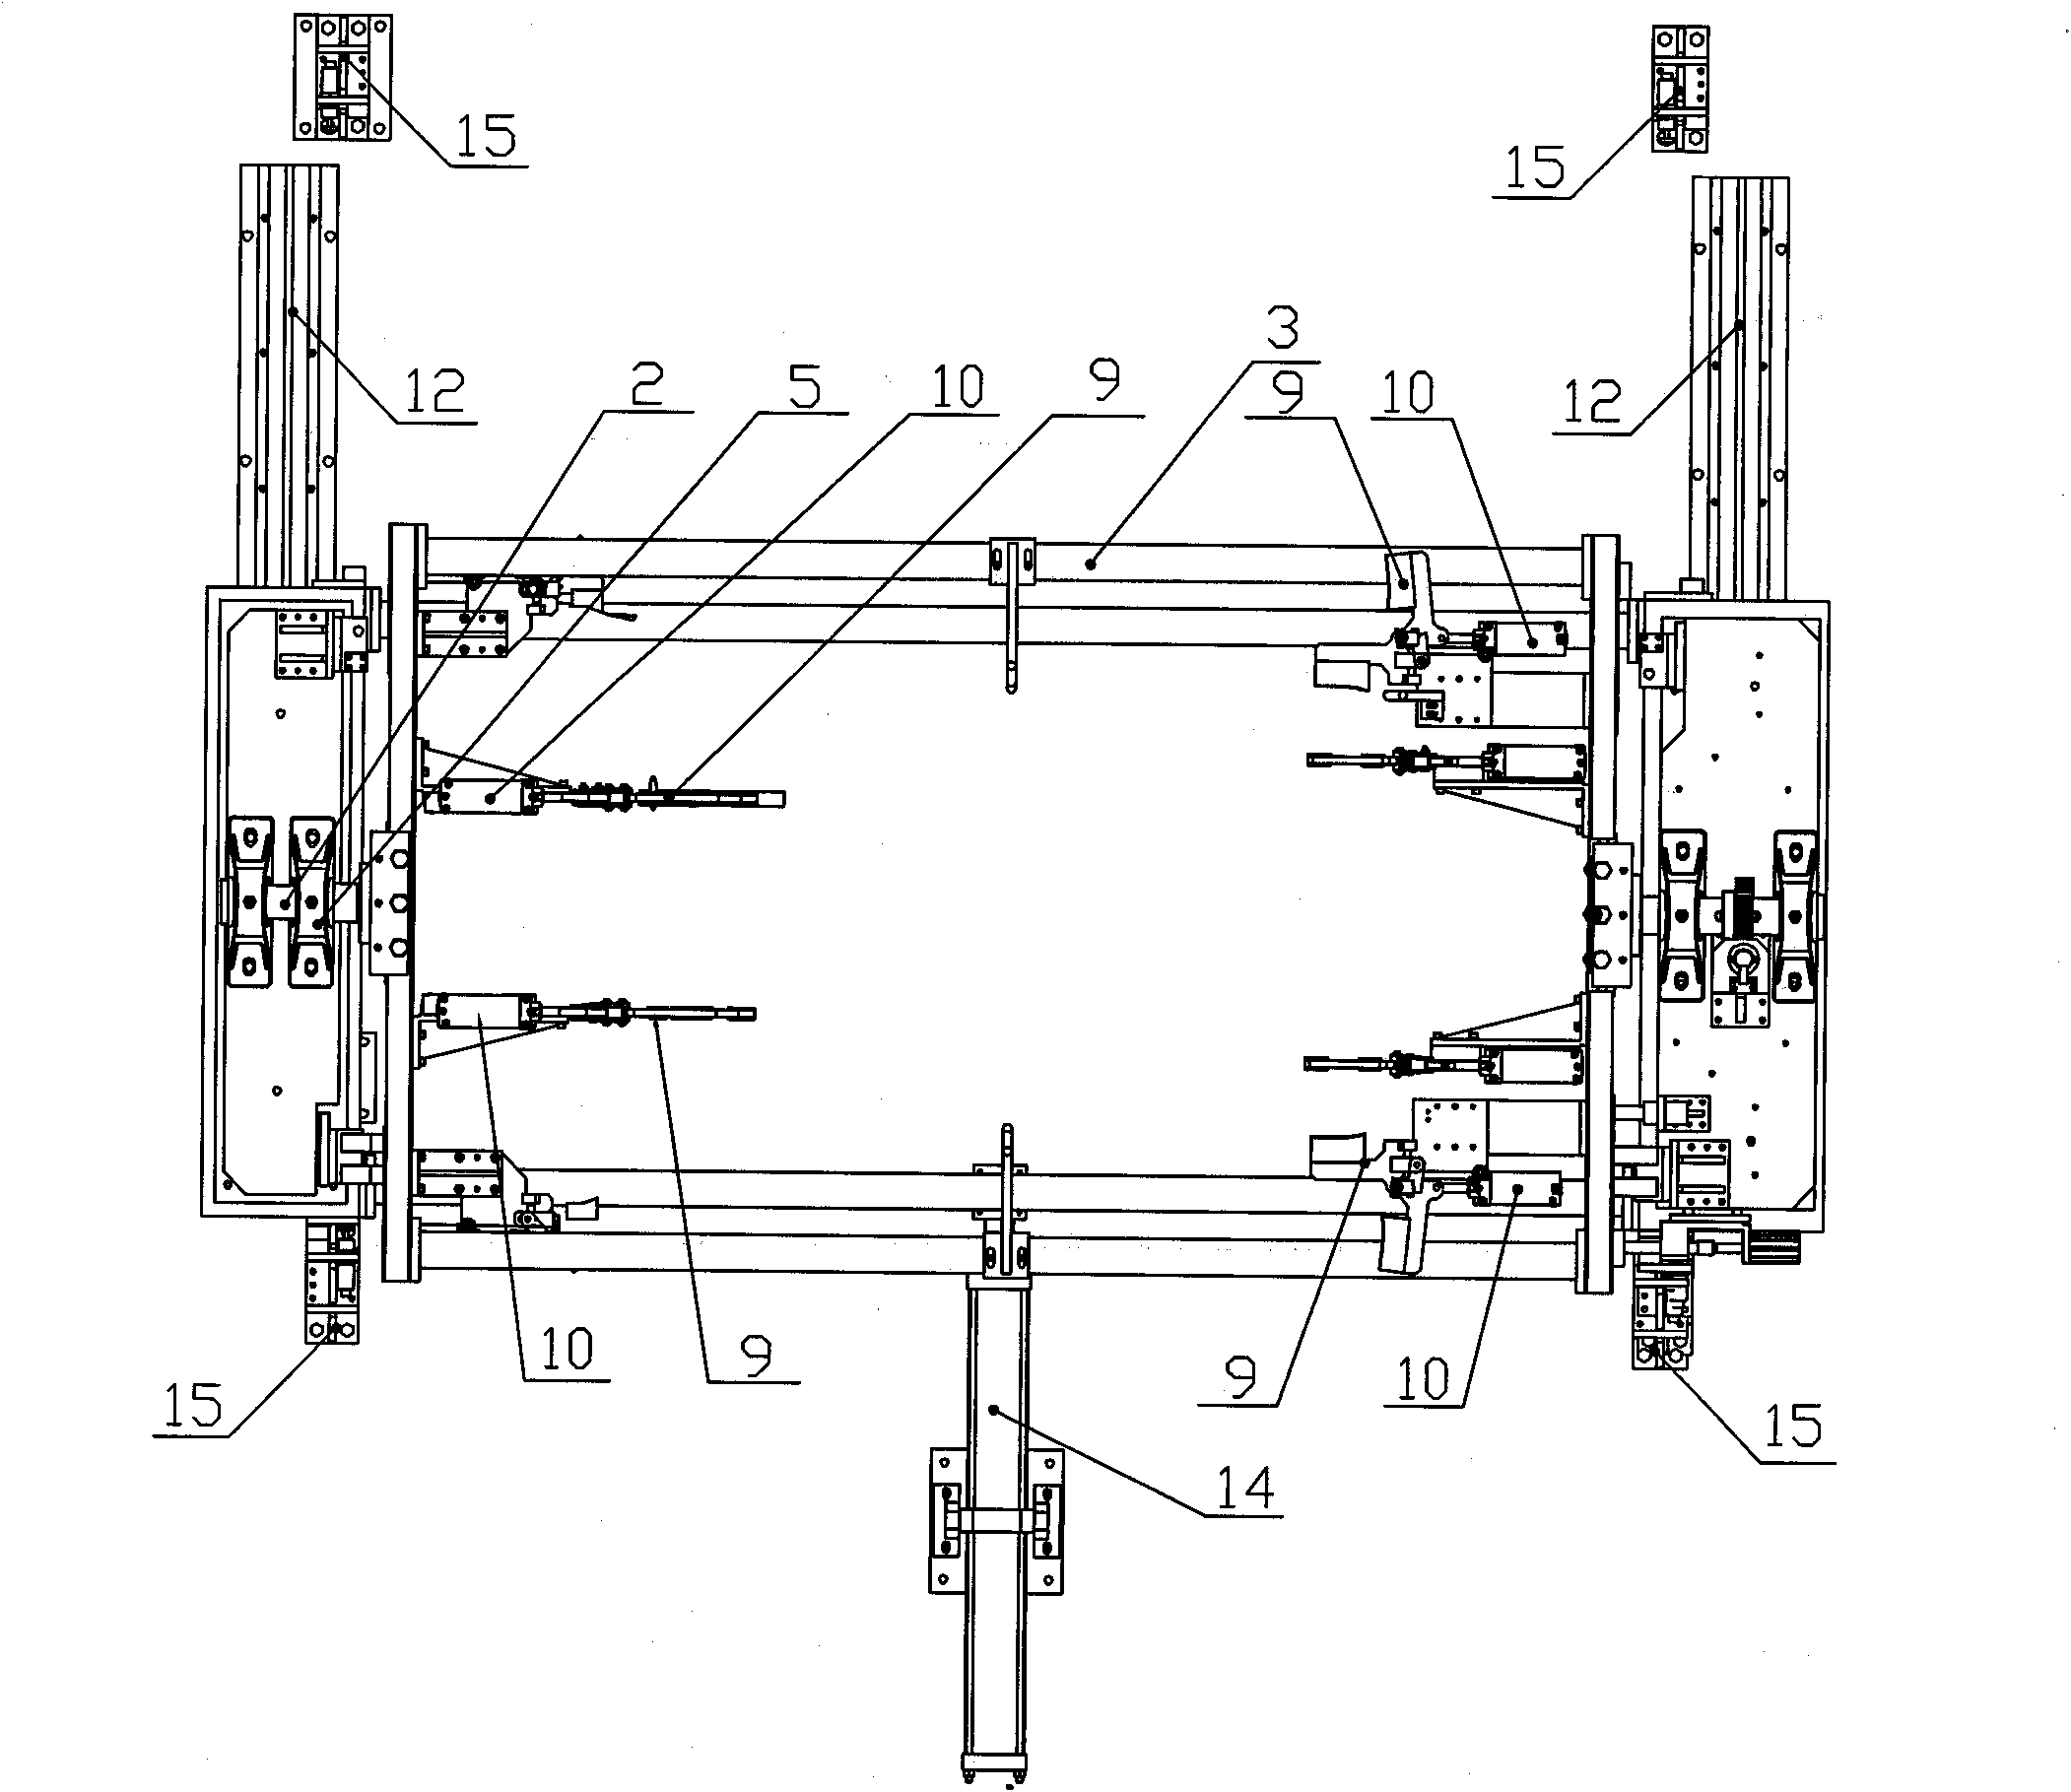 Automatic axial turnover mechanism for fixtures